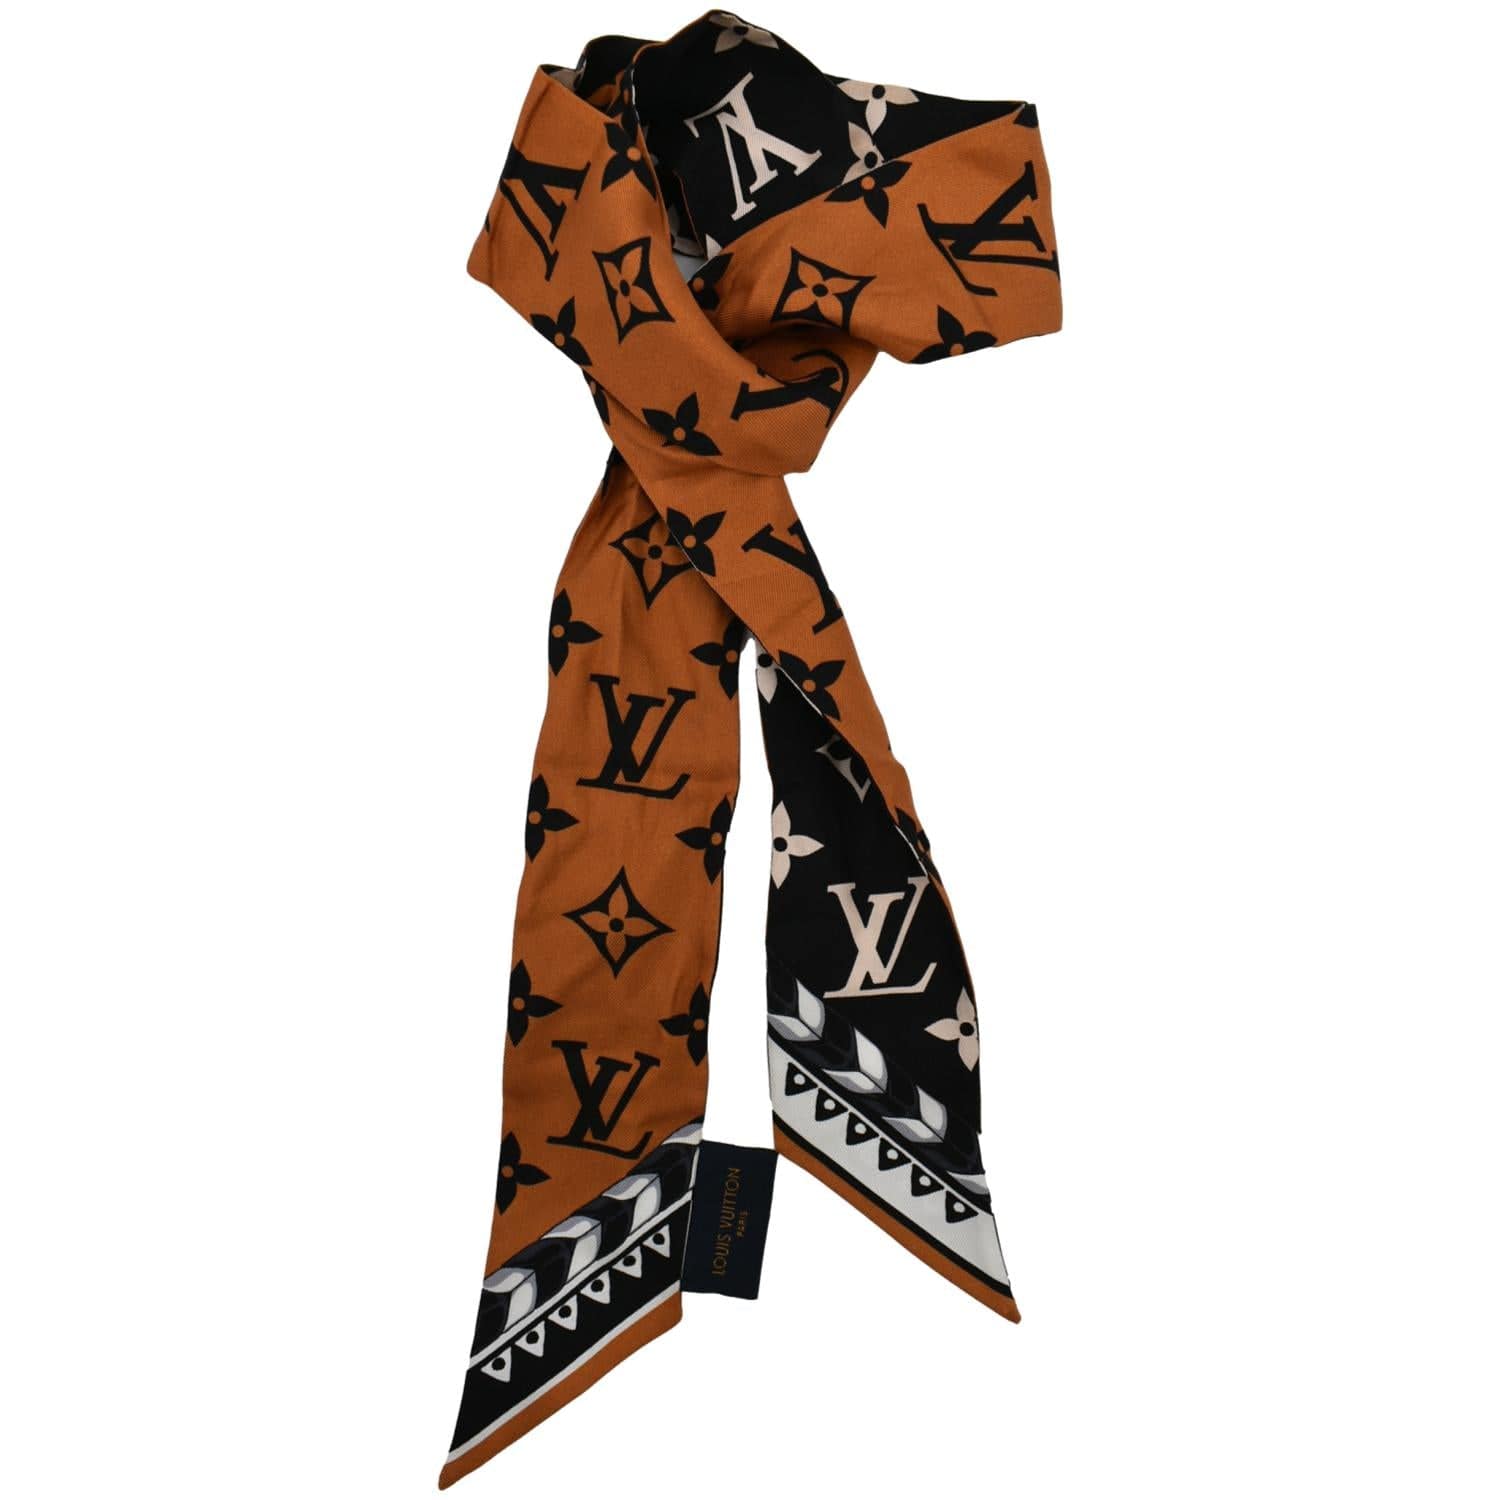 Interesting things about Louis Vuitton scarves